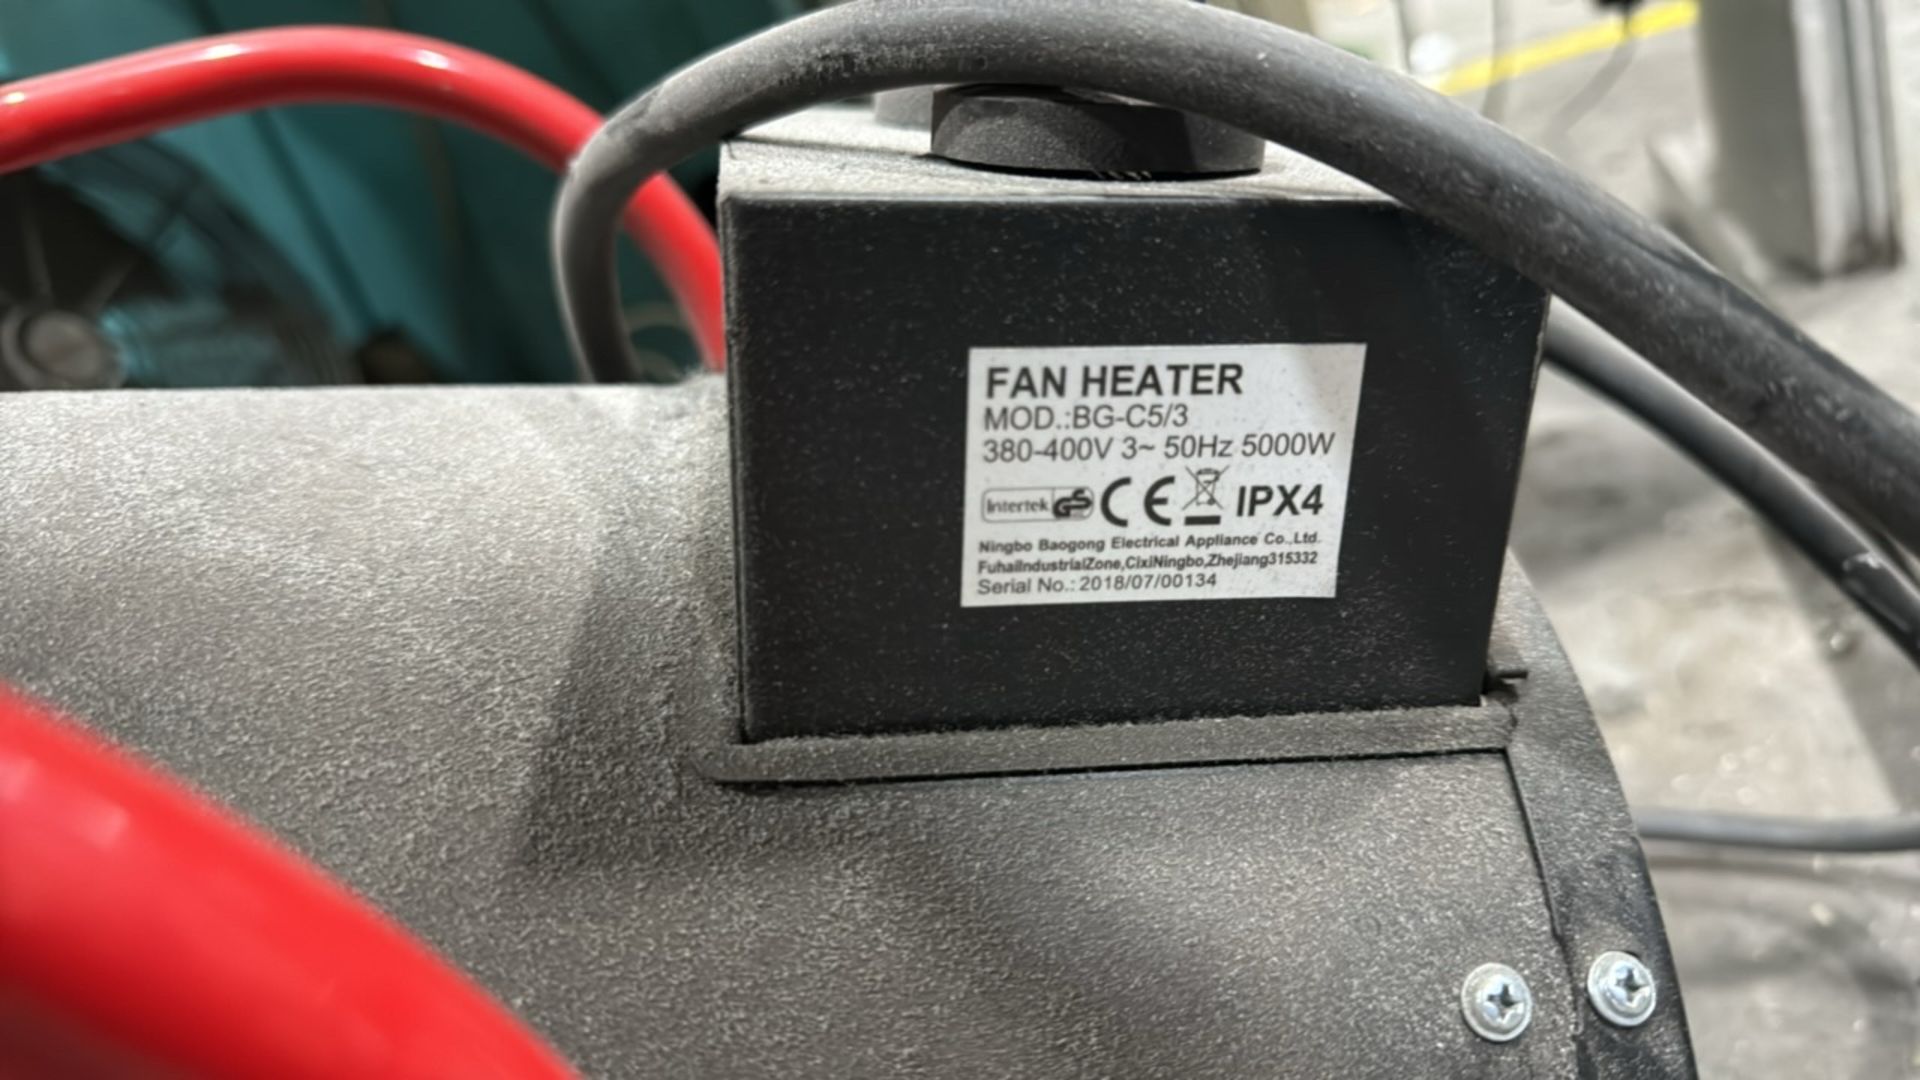 RS Pro Portable Heater - Image 4 of 4